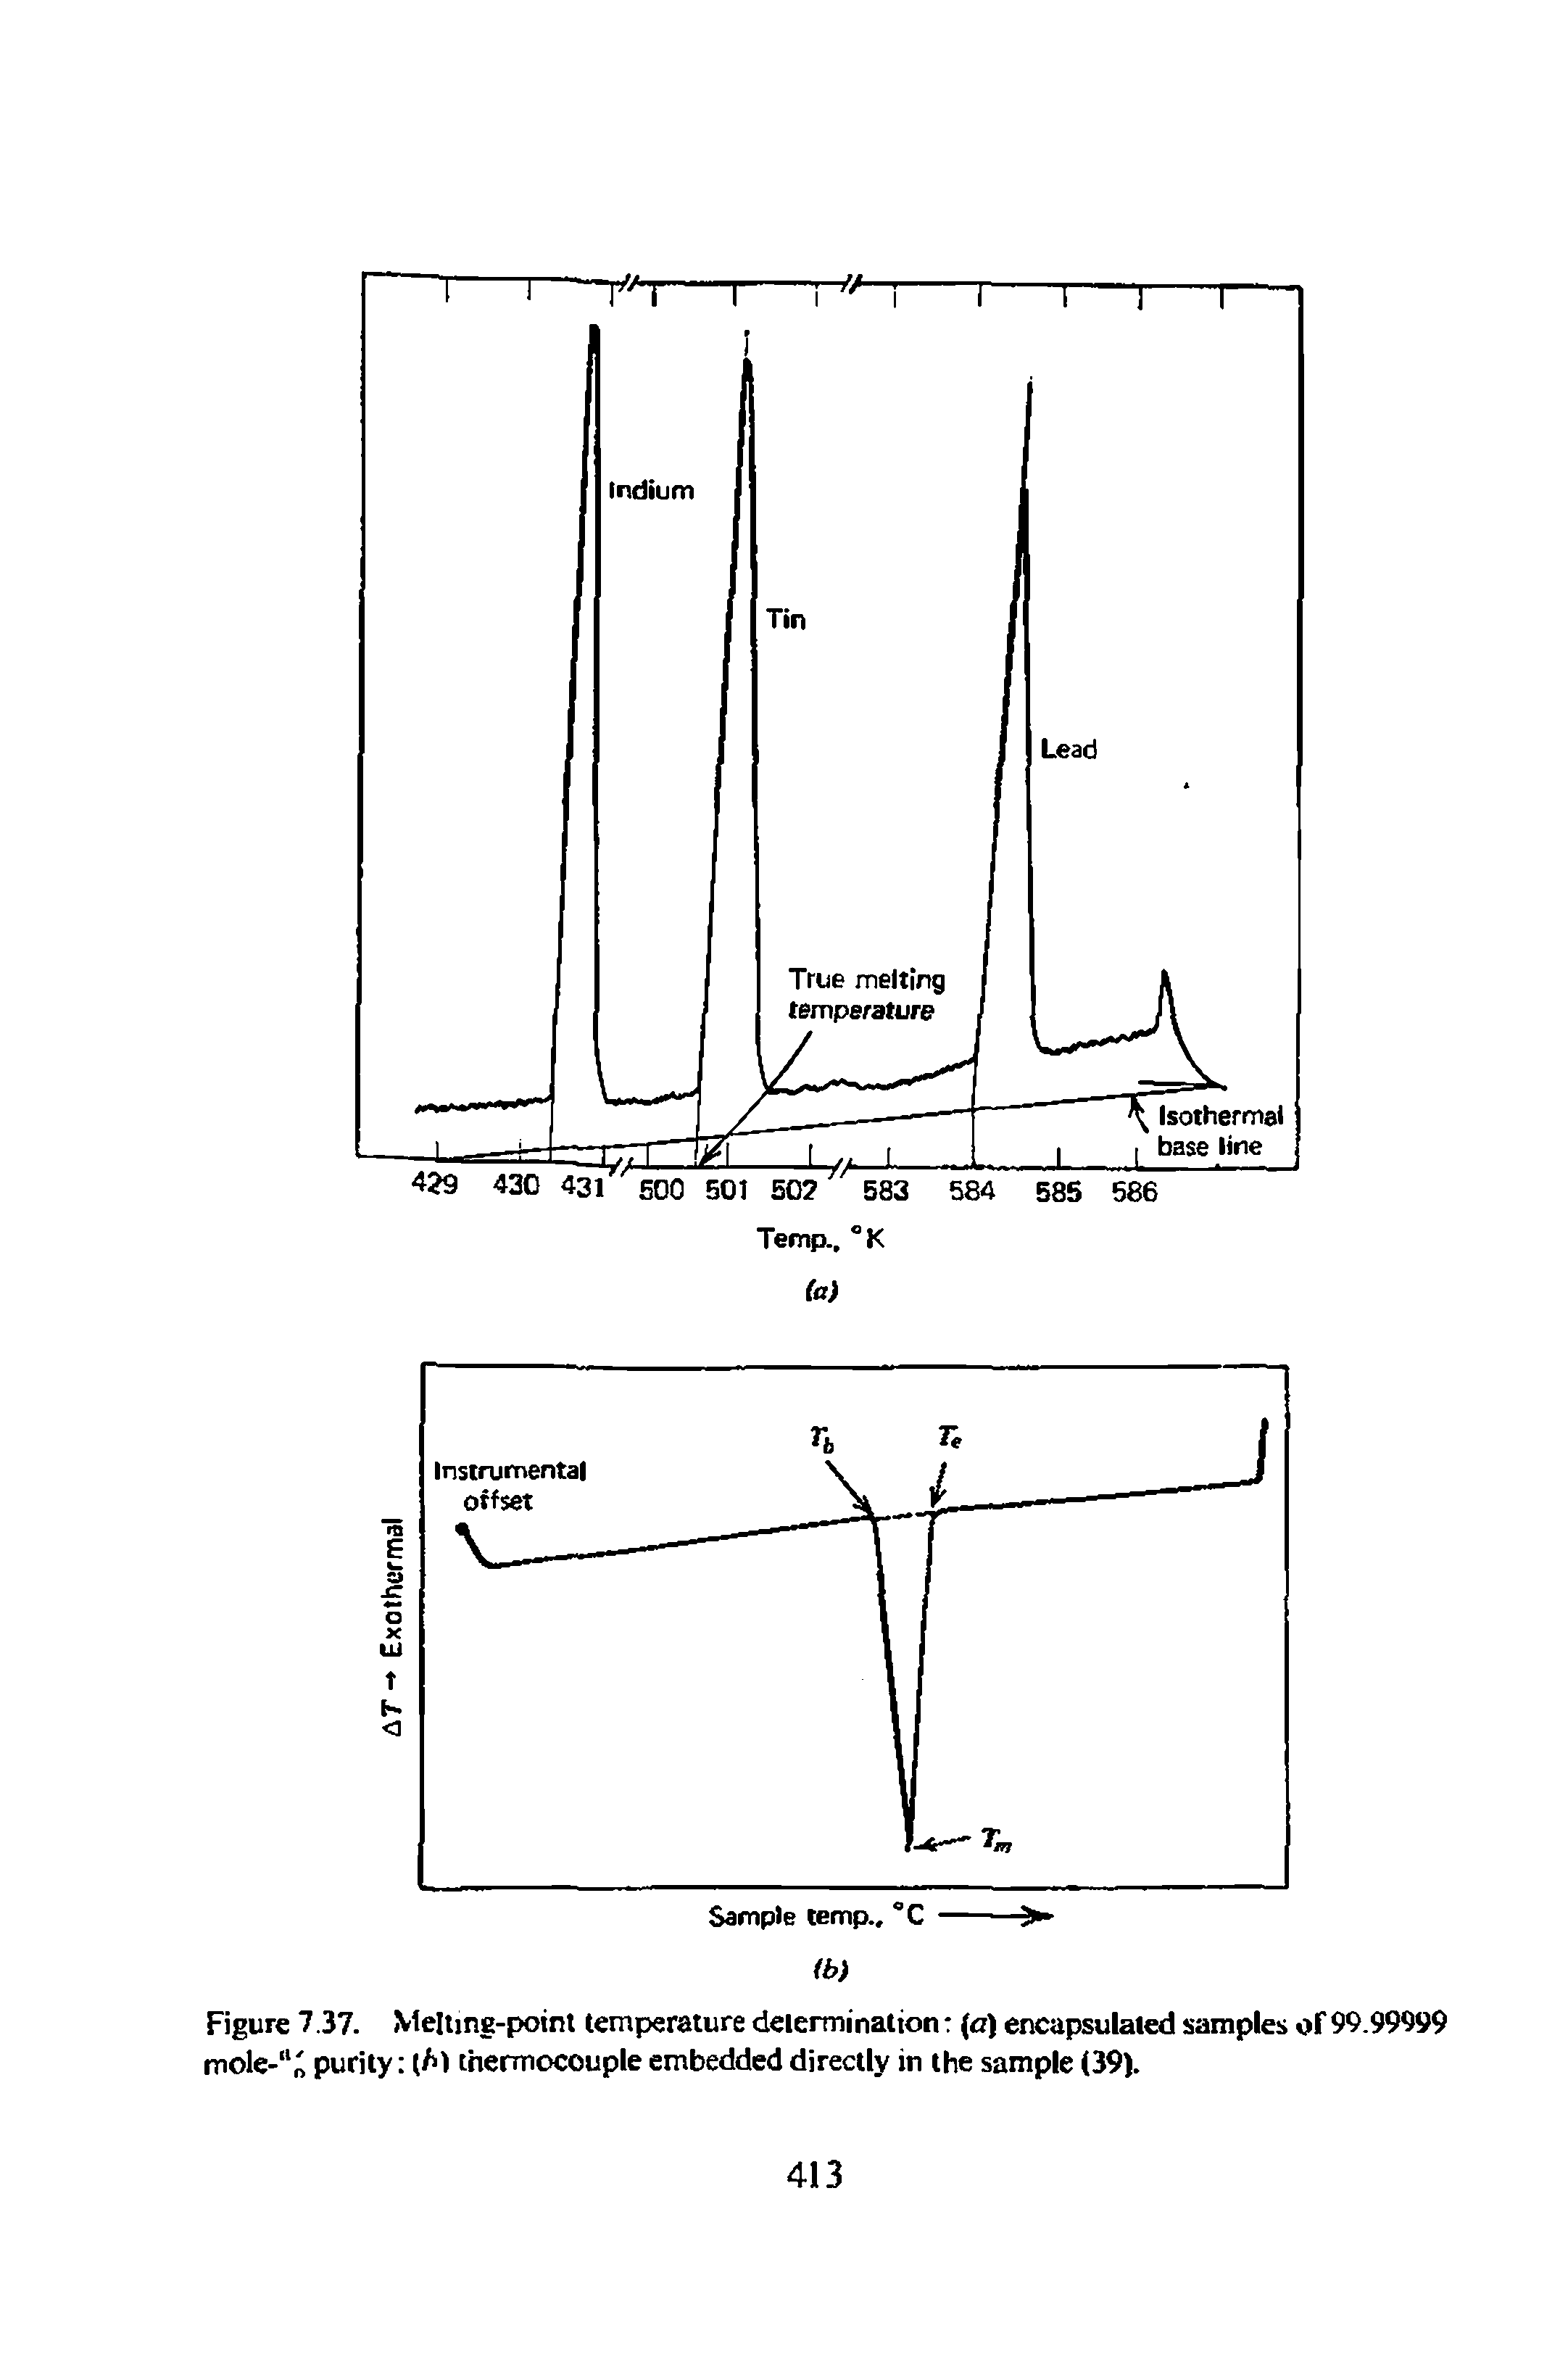 Figure 7.37. Melting-point temperature determination (a) encapsulated samples of 99.99999 niole- n purity thermocouple embedded directly in the sample (39).